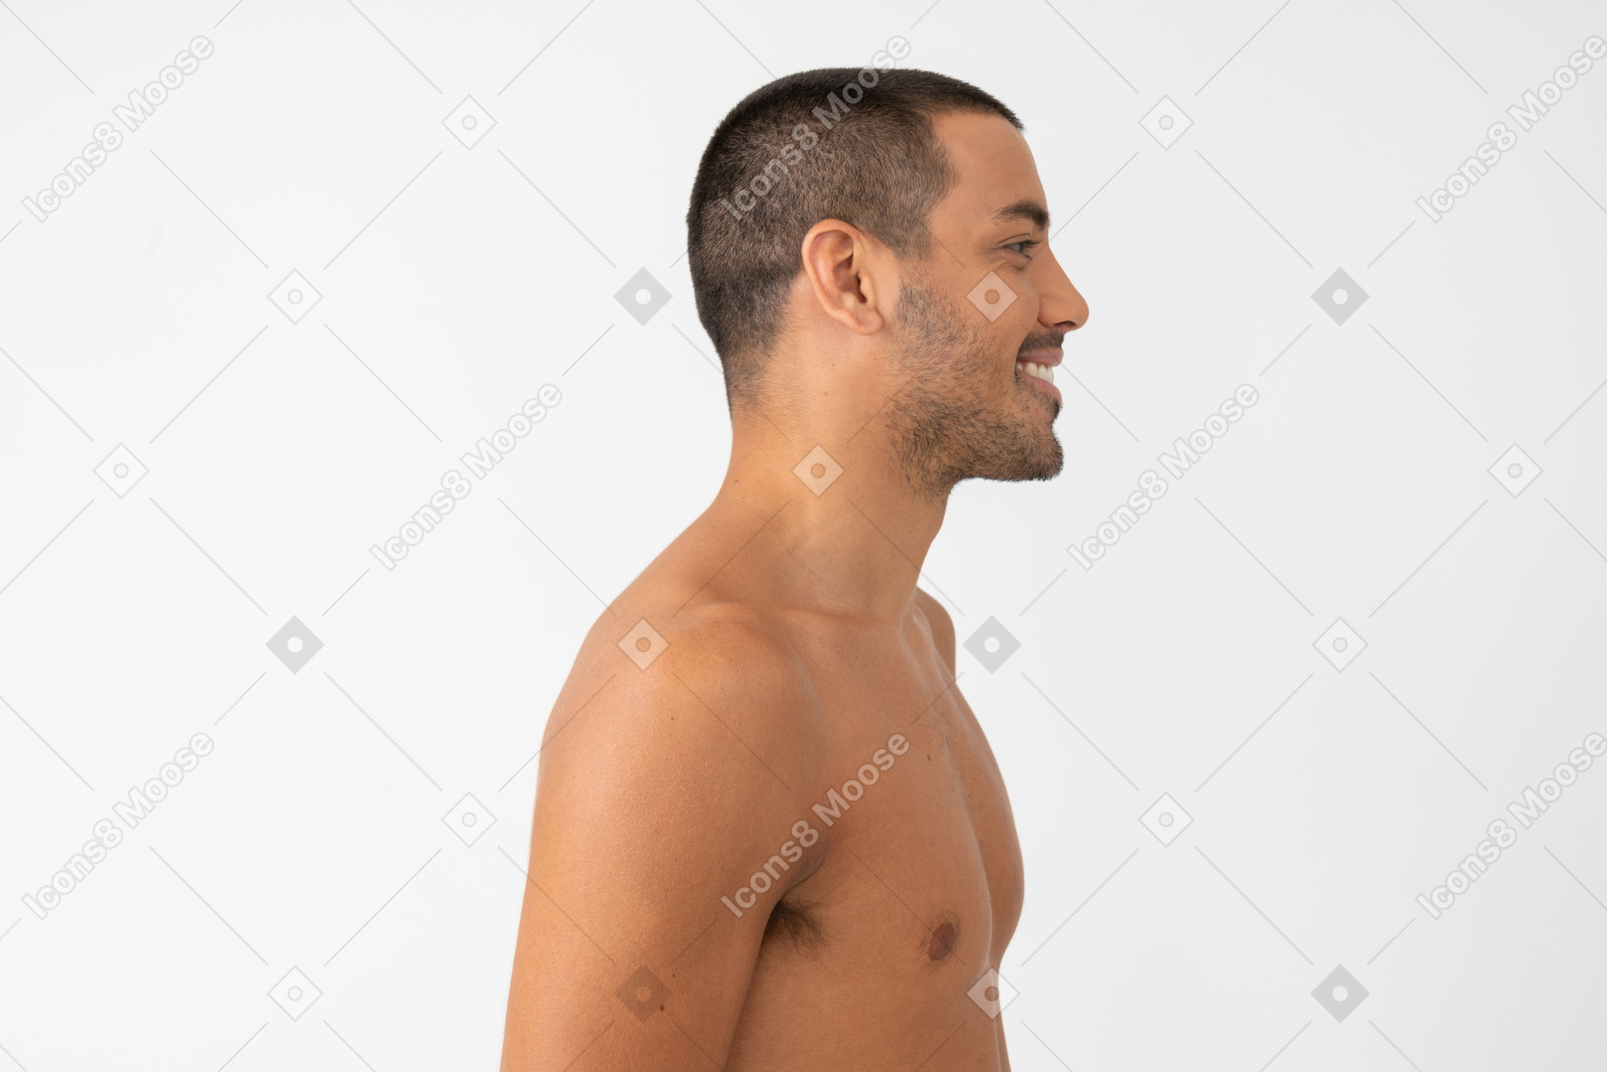 Barechested young man with a smile on his face standing in profile